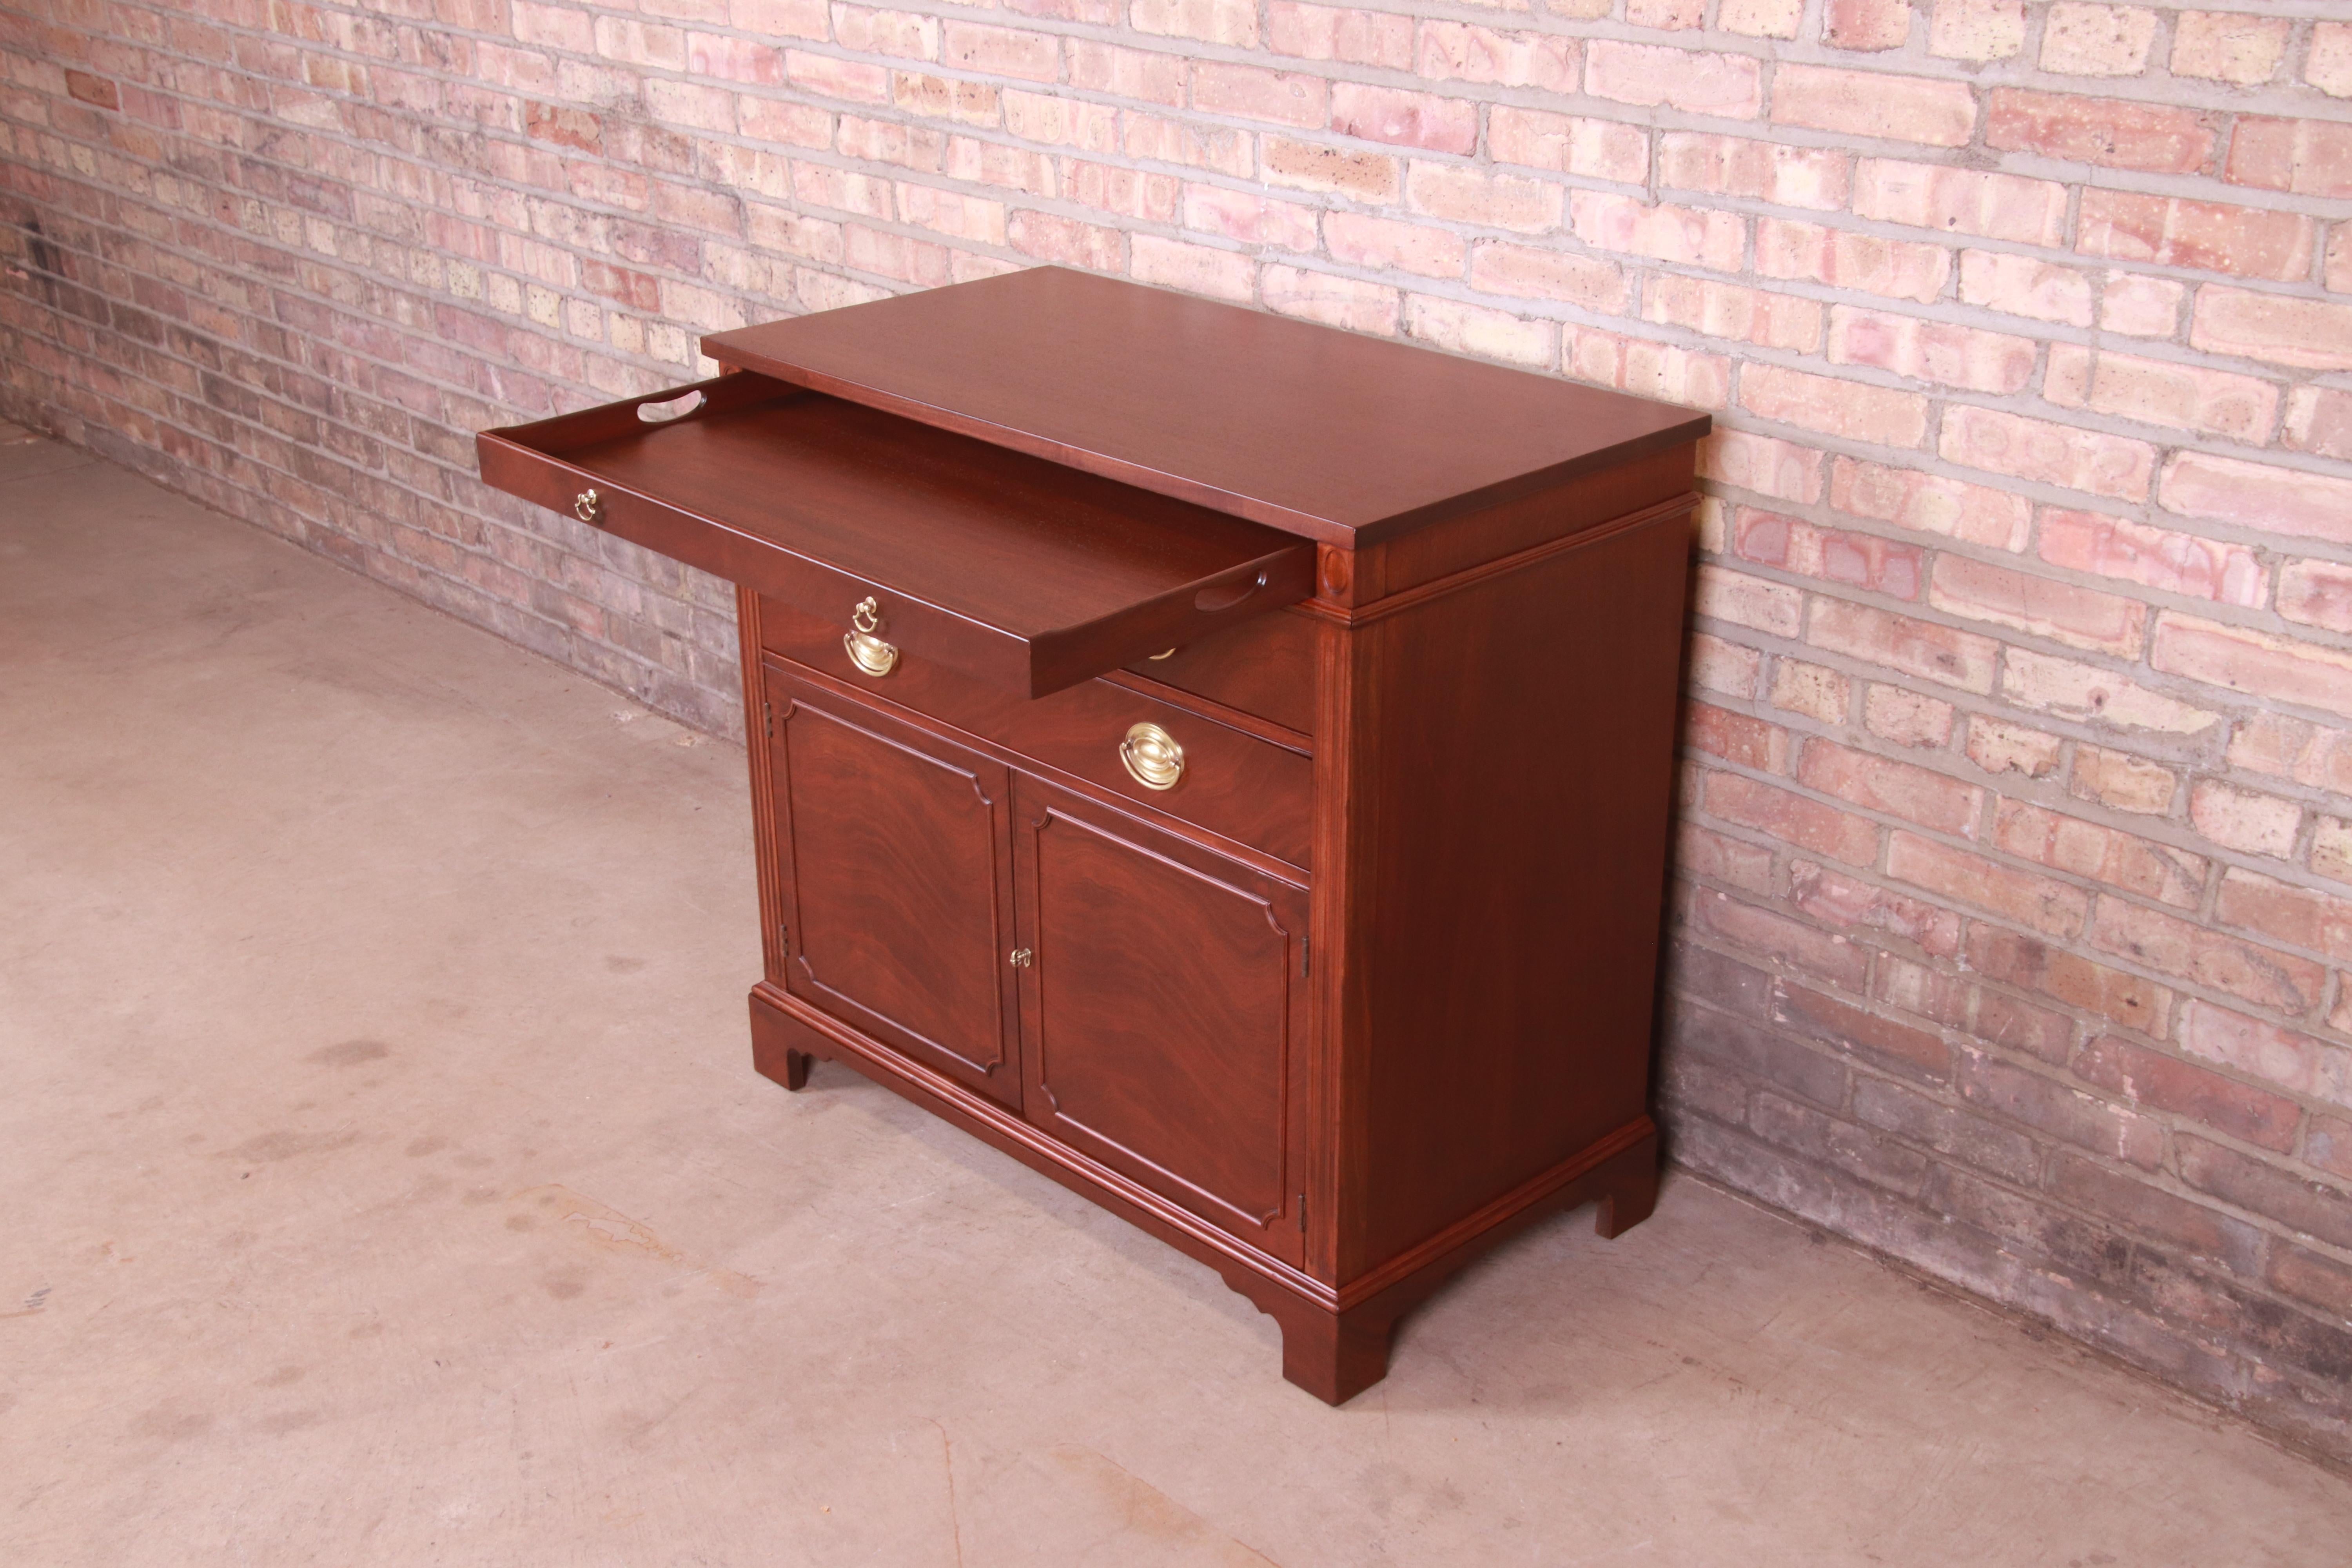 An exceptional mid-century Georgian style compact credenza, sideboard buffet, or bar cabinet

By Drexel Furniture, 